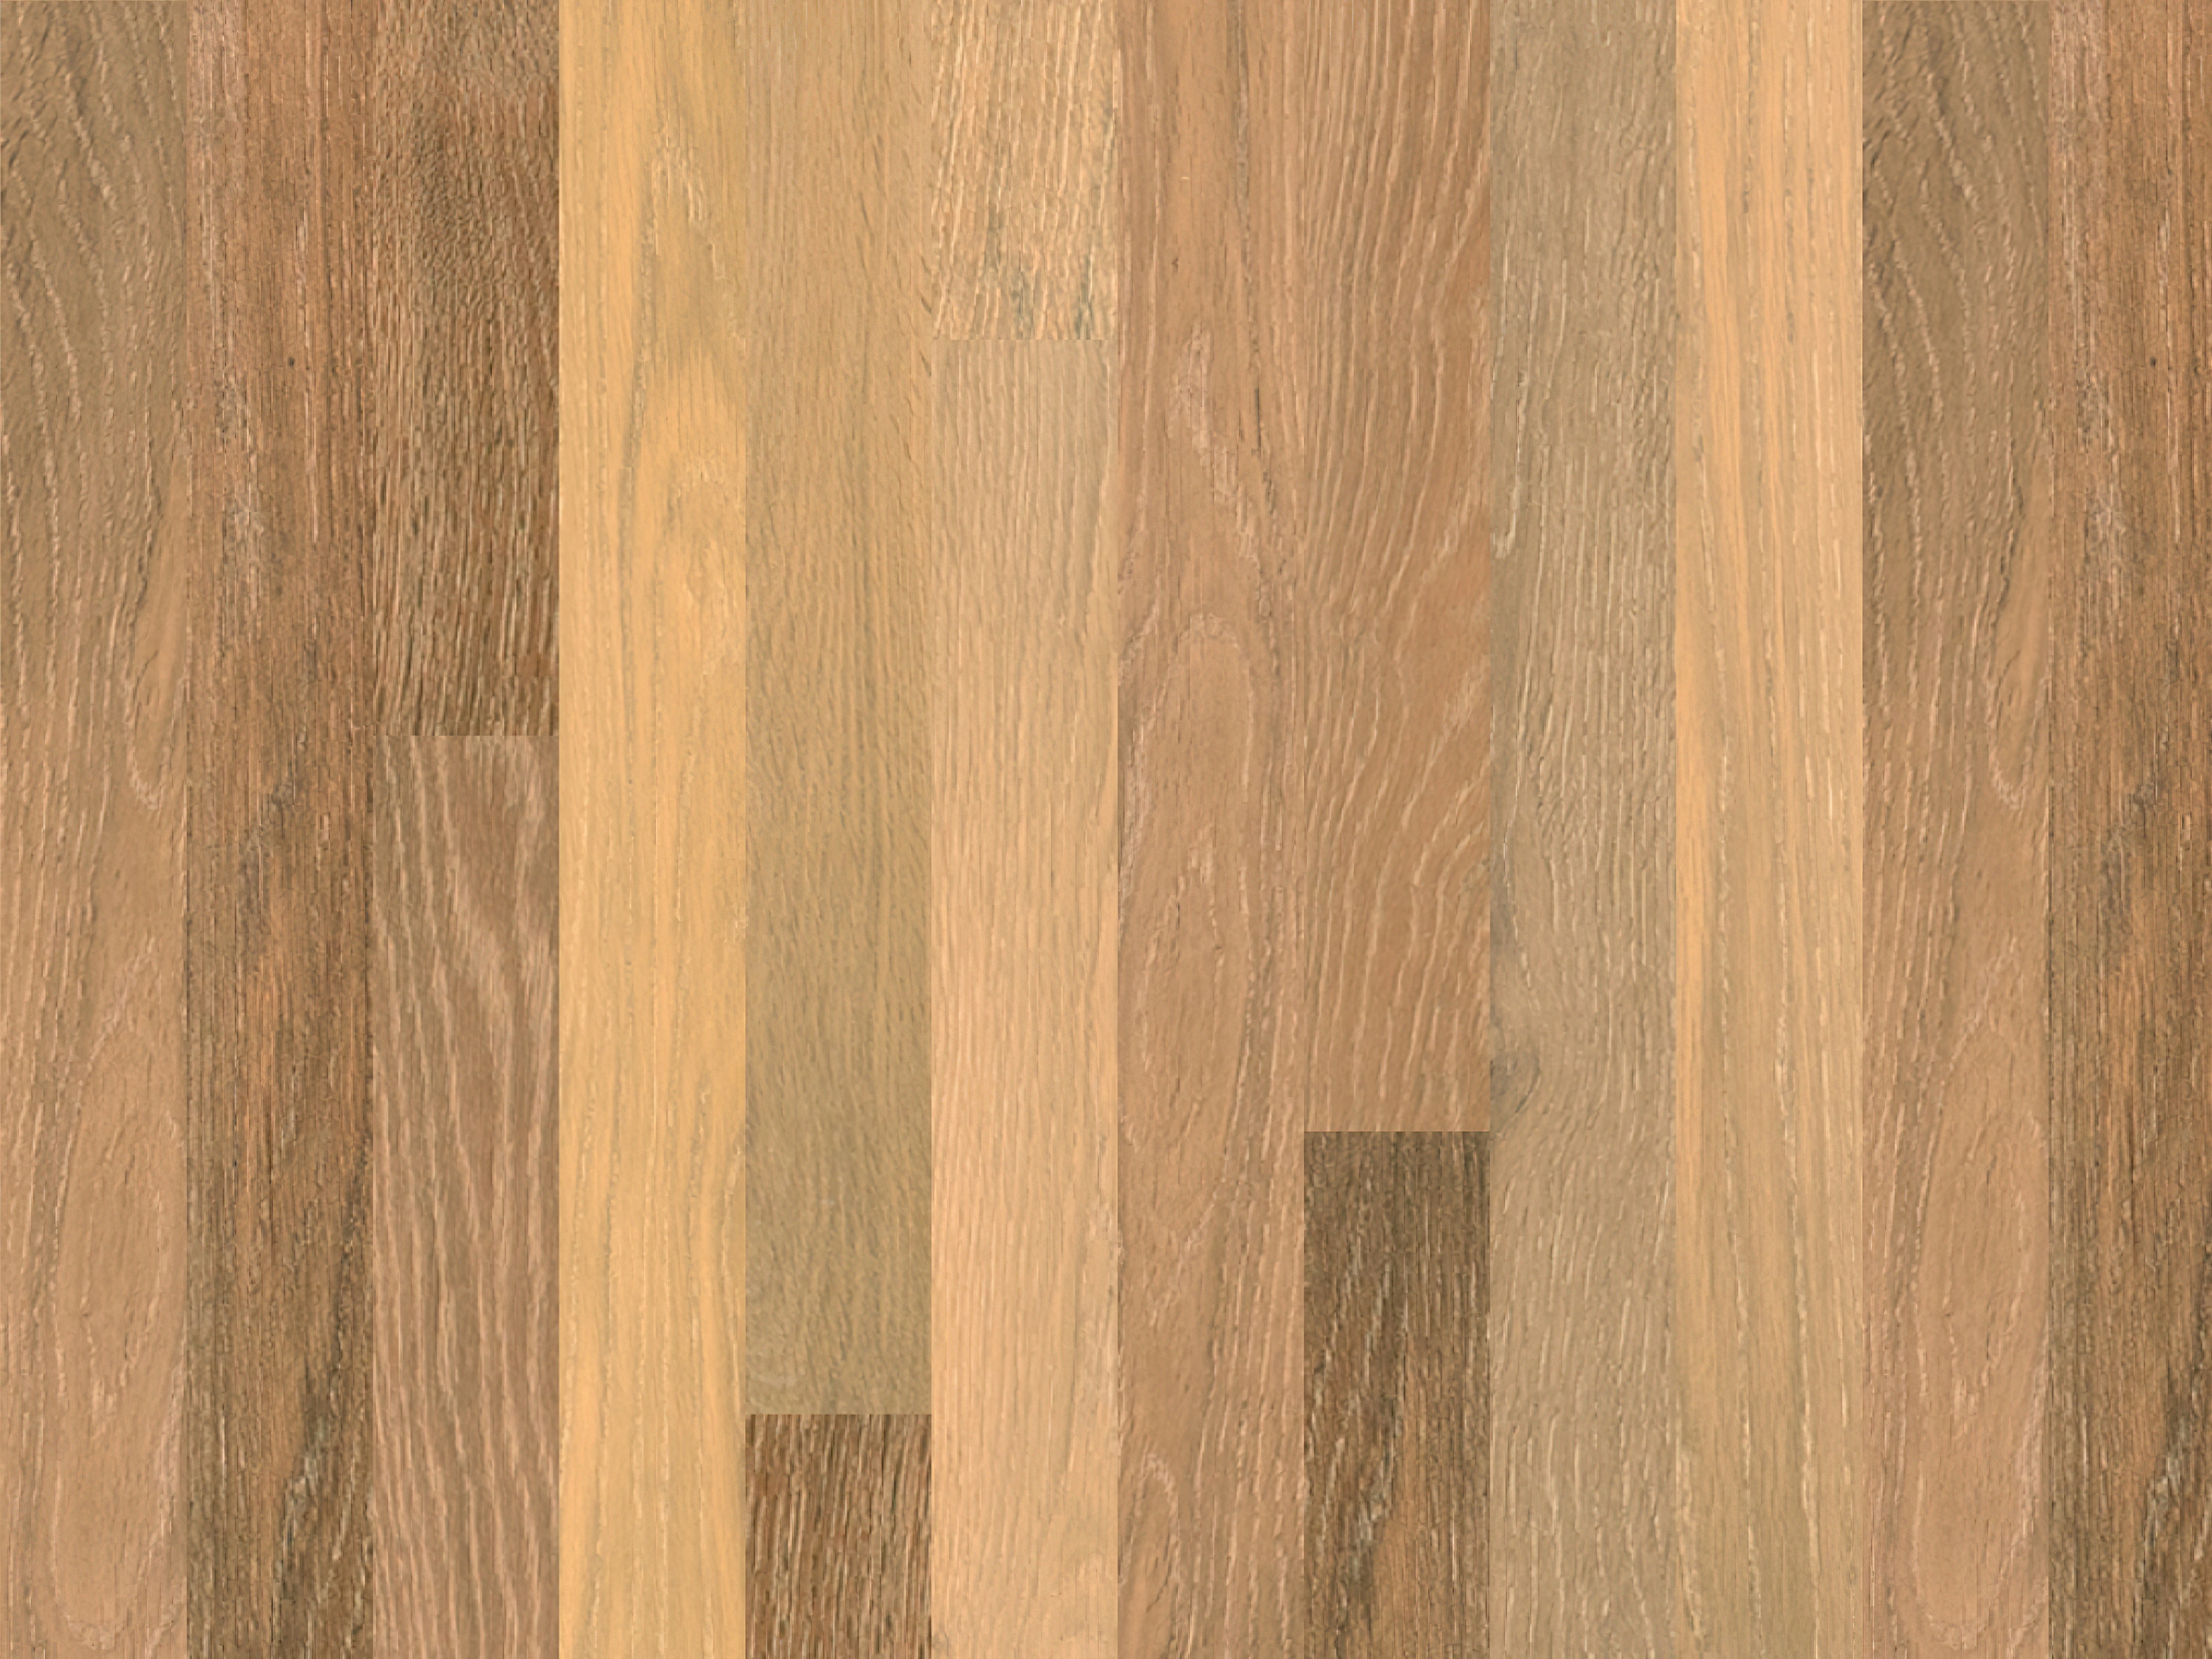 duchateau the guild makerlab edition lathe european oak engineered hardnatural wood floor uv lacquer finish for interior use distributed by surface group international